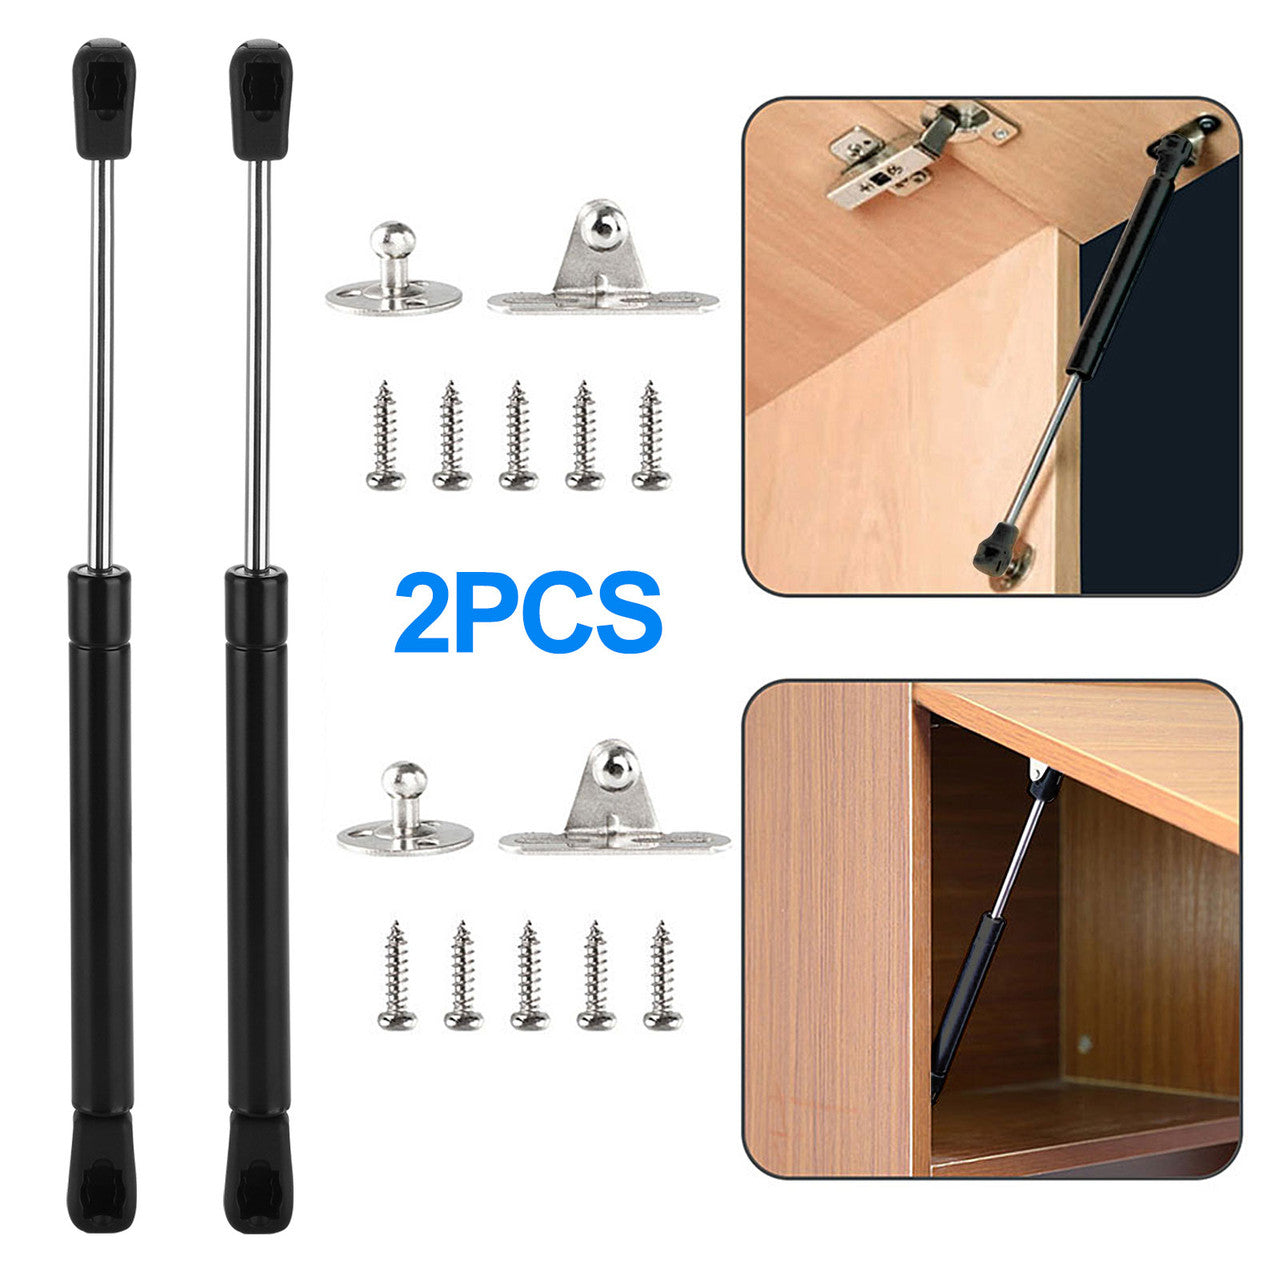 100N Hydraulic Gas Strut Lift Support Cabinet Hinge Kitchen Cupboard Door Gas Spring Door Shocks Cabinets Hinges,for Toy Box, Soft Down Lid Stay, Soft Close Lid Hinge, 2Pcs